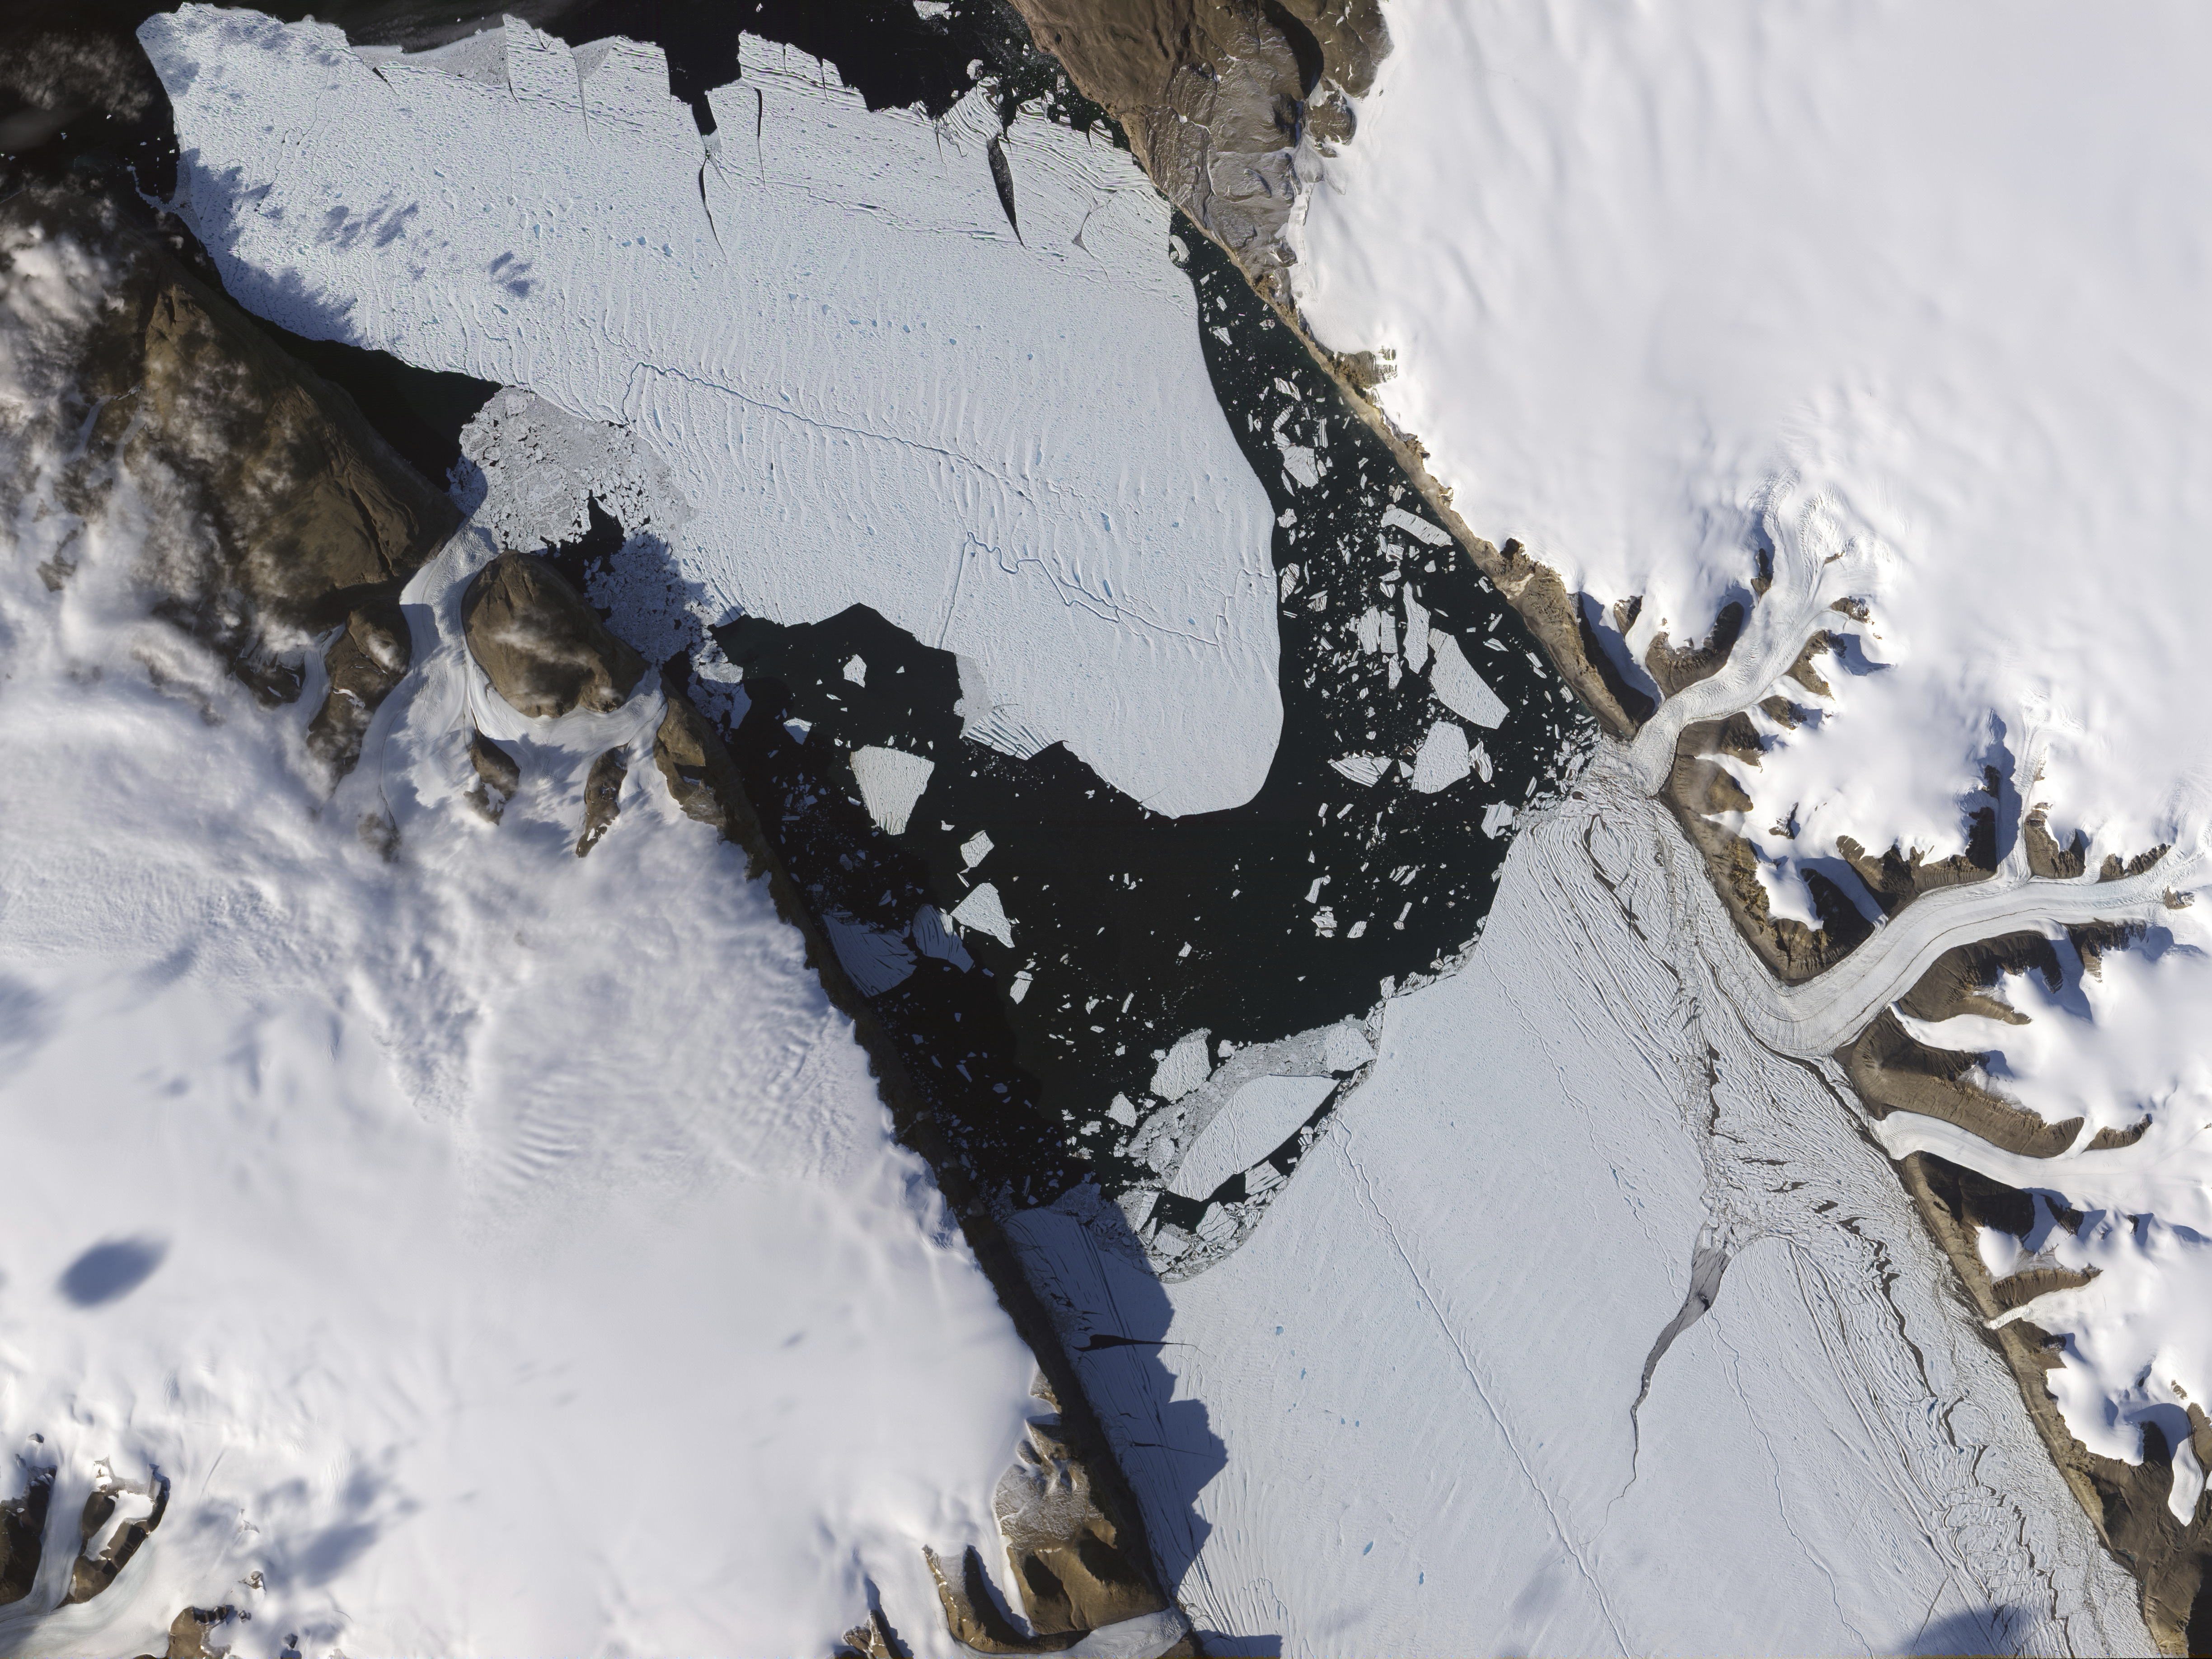 Image provided by NASA Earth Observatory shows a piece of the Petermann Glacier cracked in Greenland. /AP 